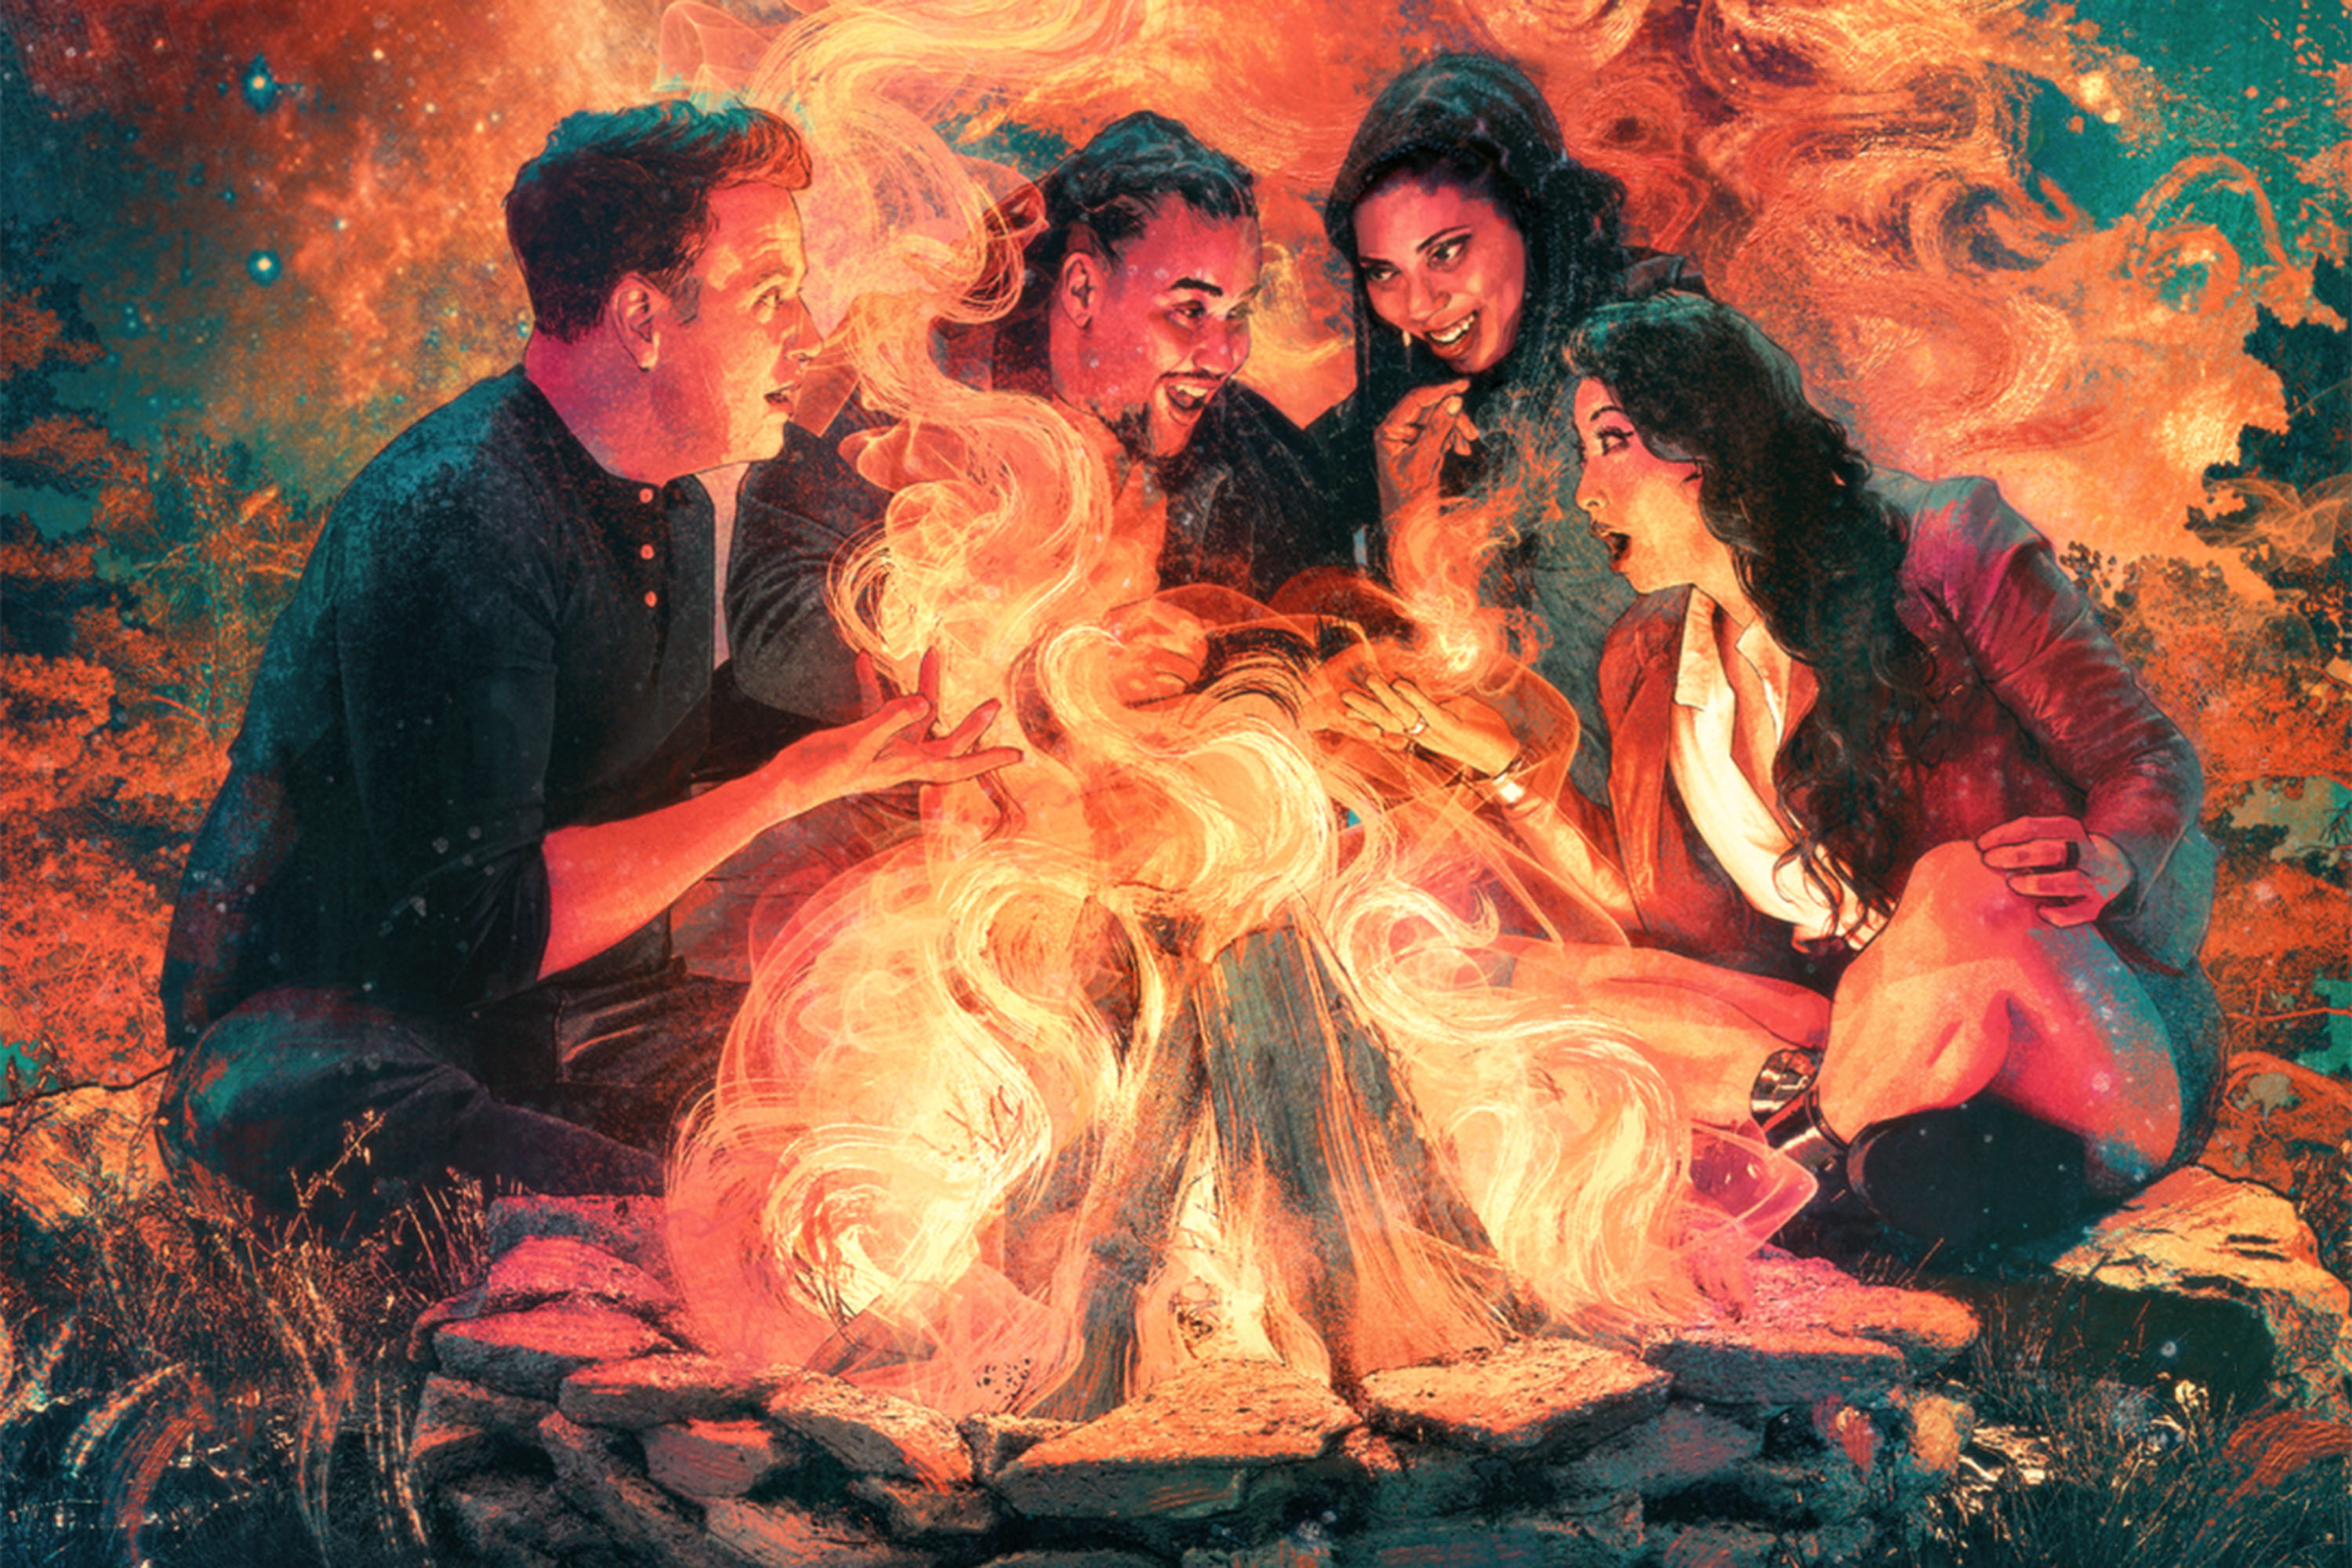 The cast of Worlds Beyond Number sits around a fire, their images stylized with thick, glowing brushstokes.